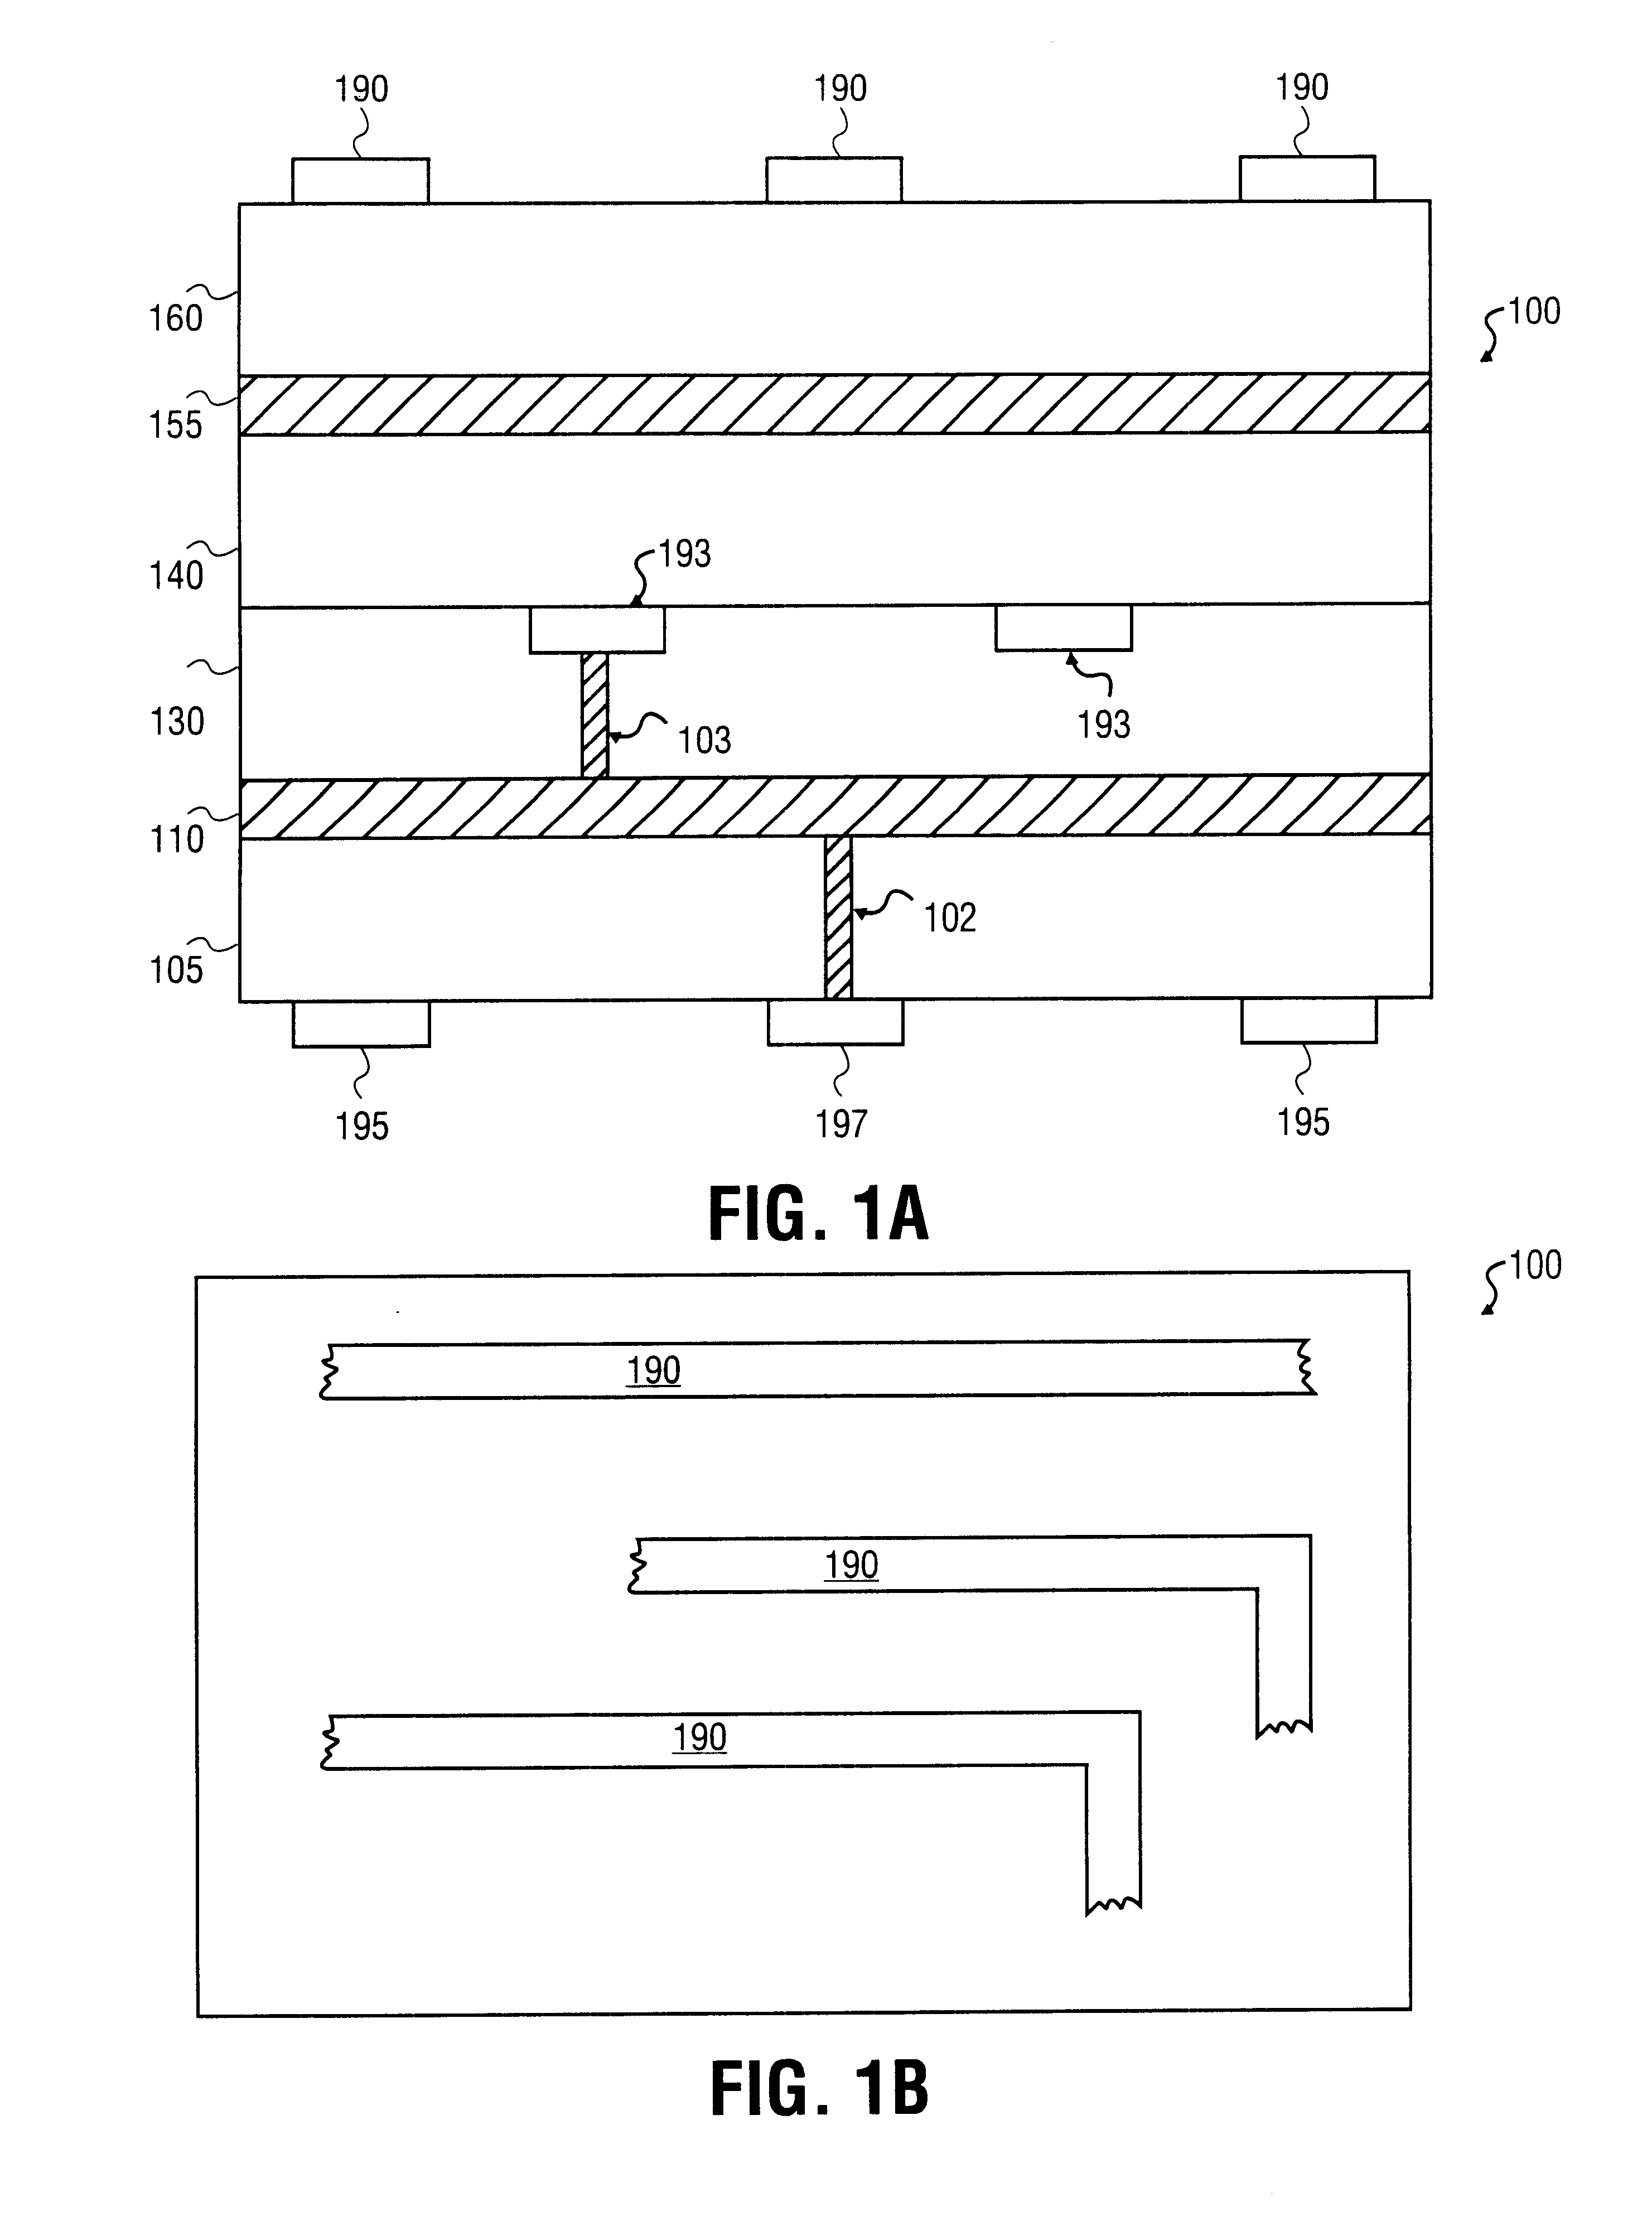 Method of making higher impedance traces on a low impedance circuit board